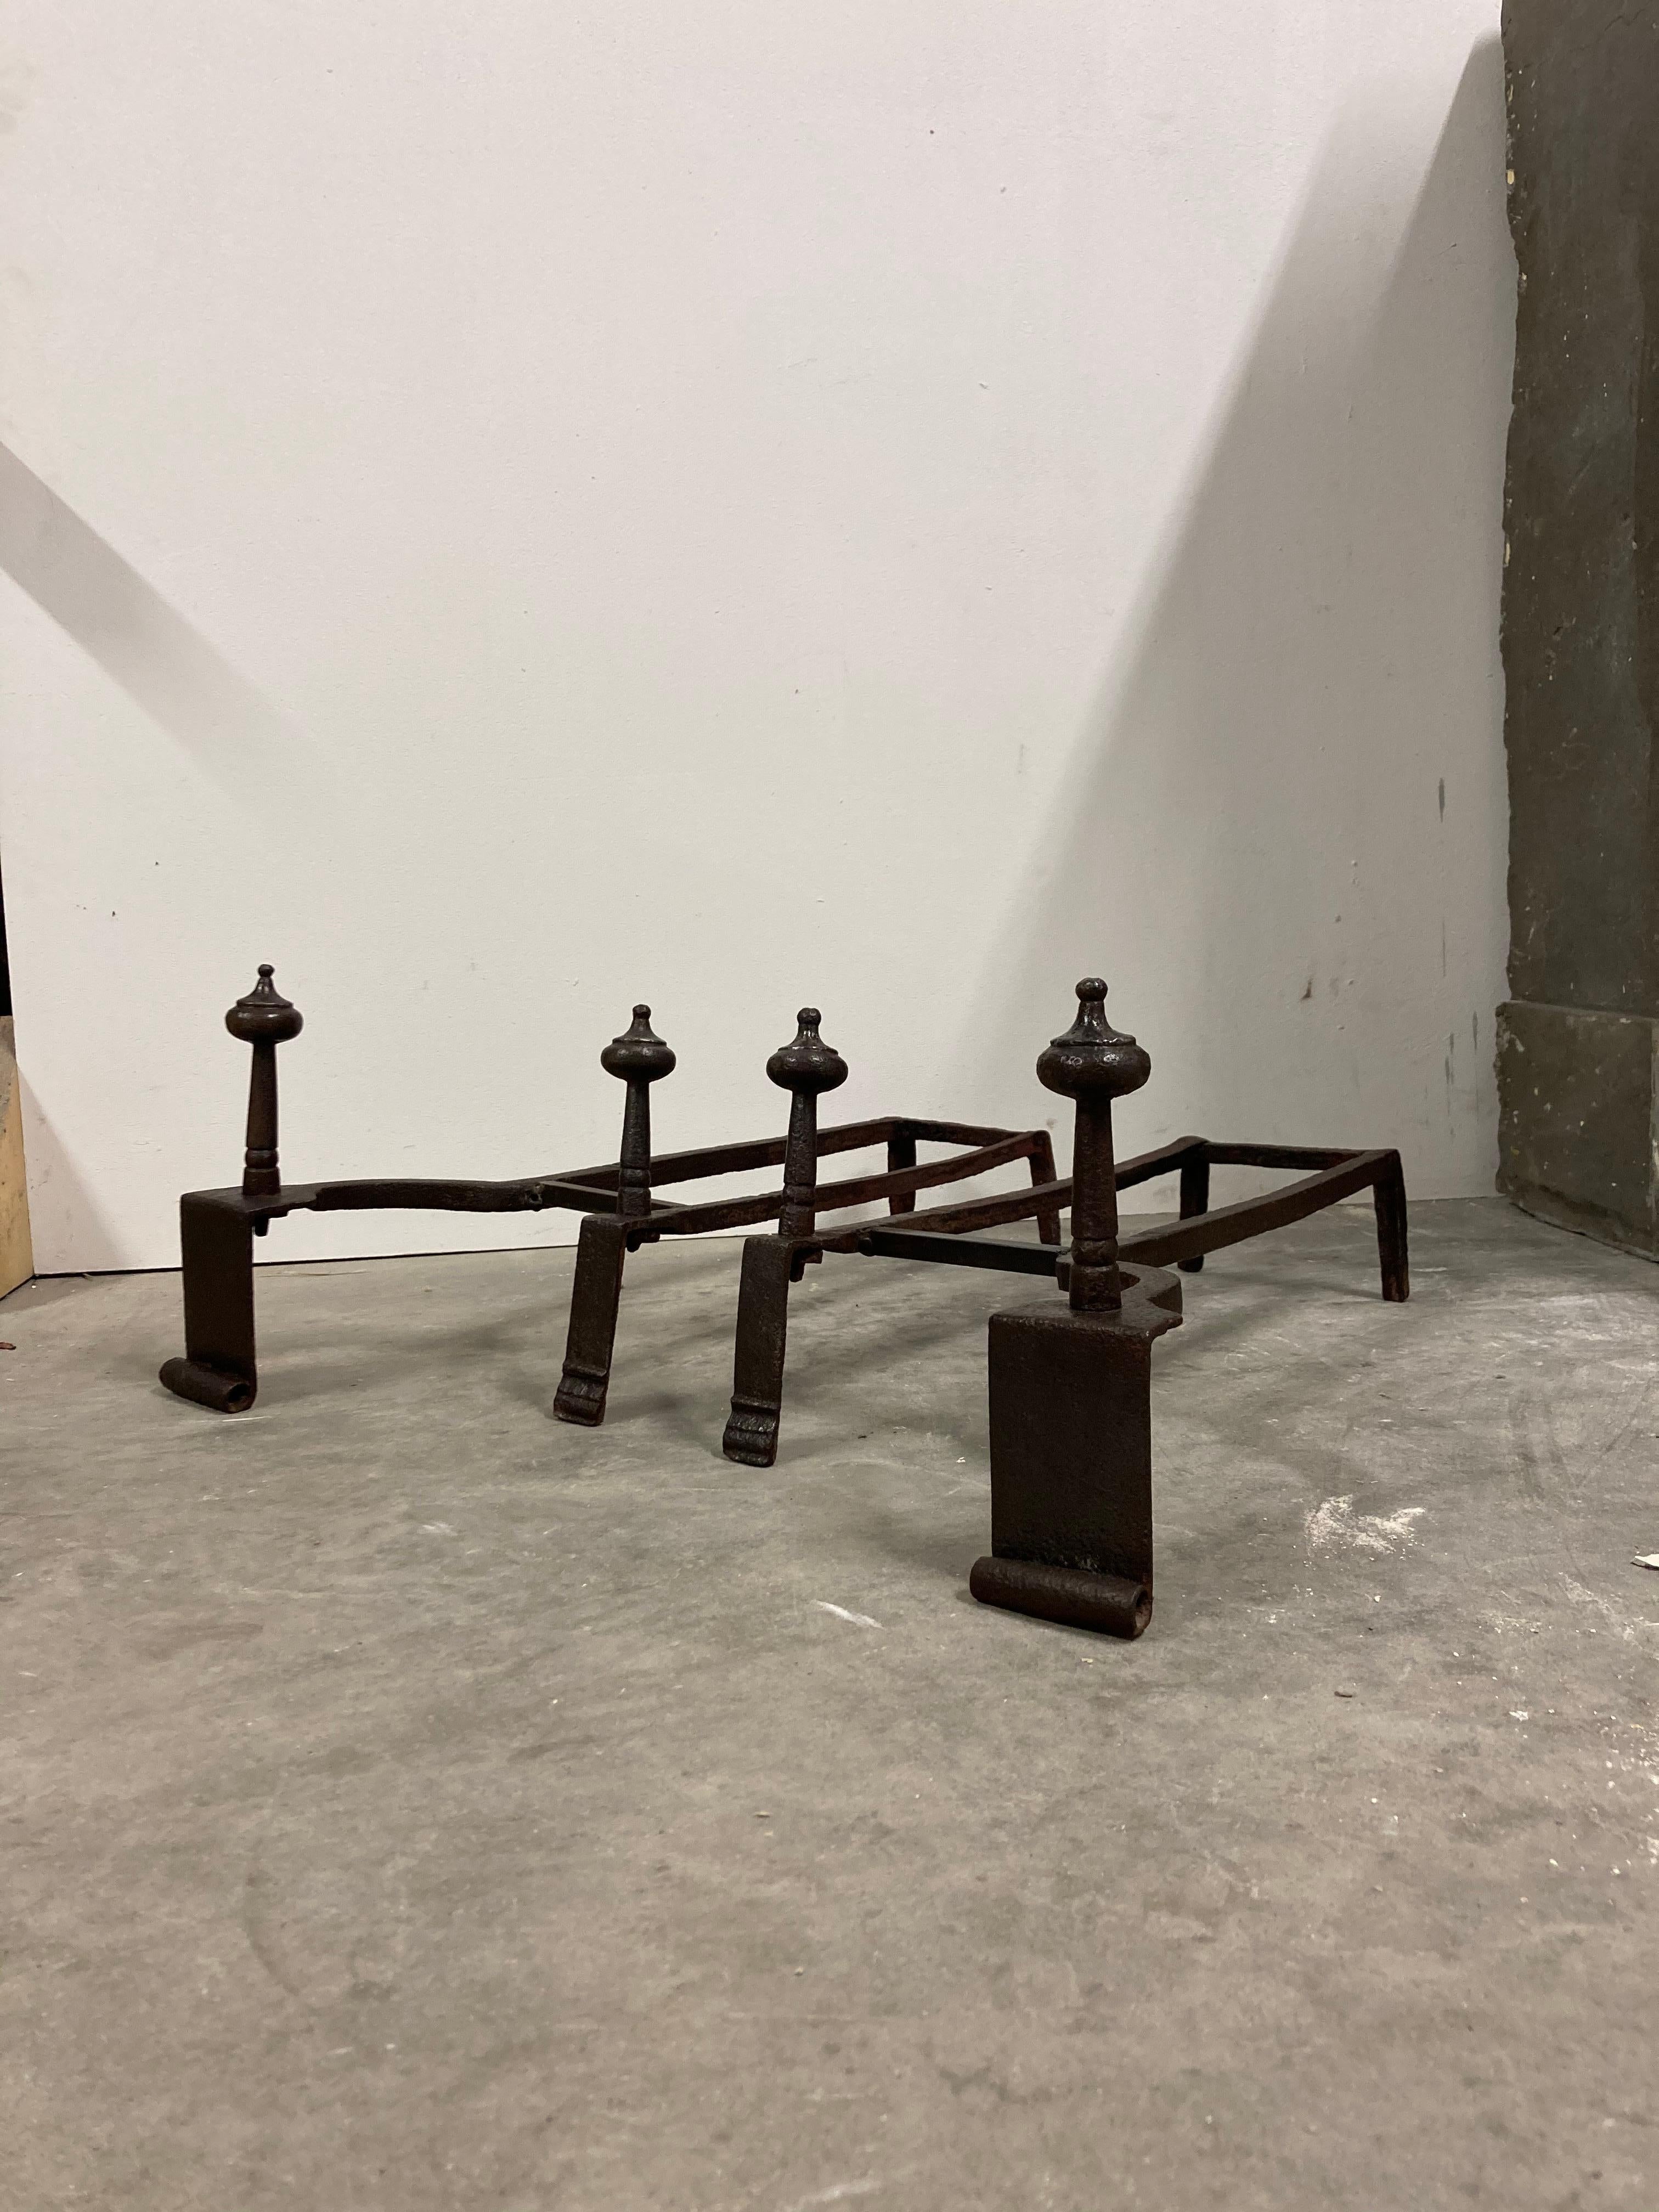 Nice set of 18th century French andirons.
They are beautifully crafted by a talented blacksmith.
The front bar is of later date to add stability.

These andirons are easy in use and make stacking logs easier and safer. They also “fill” the